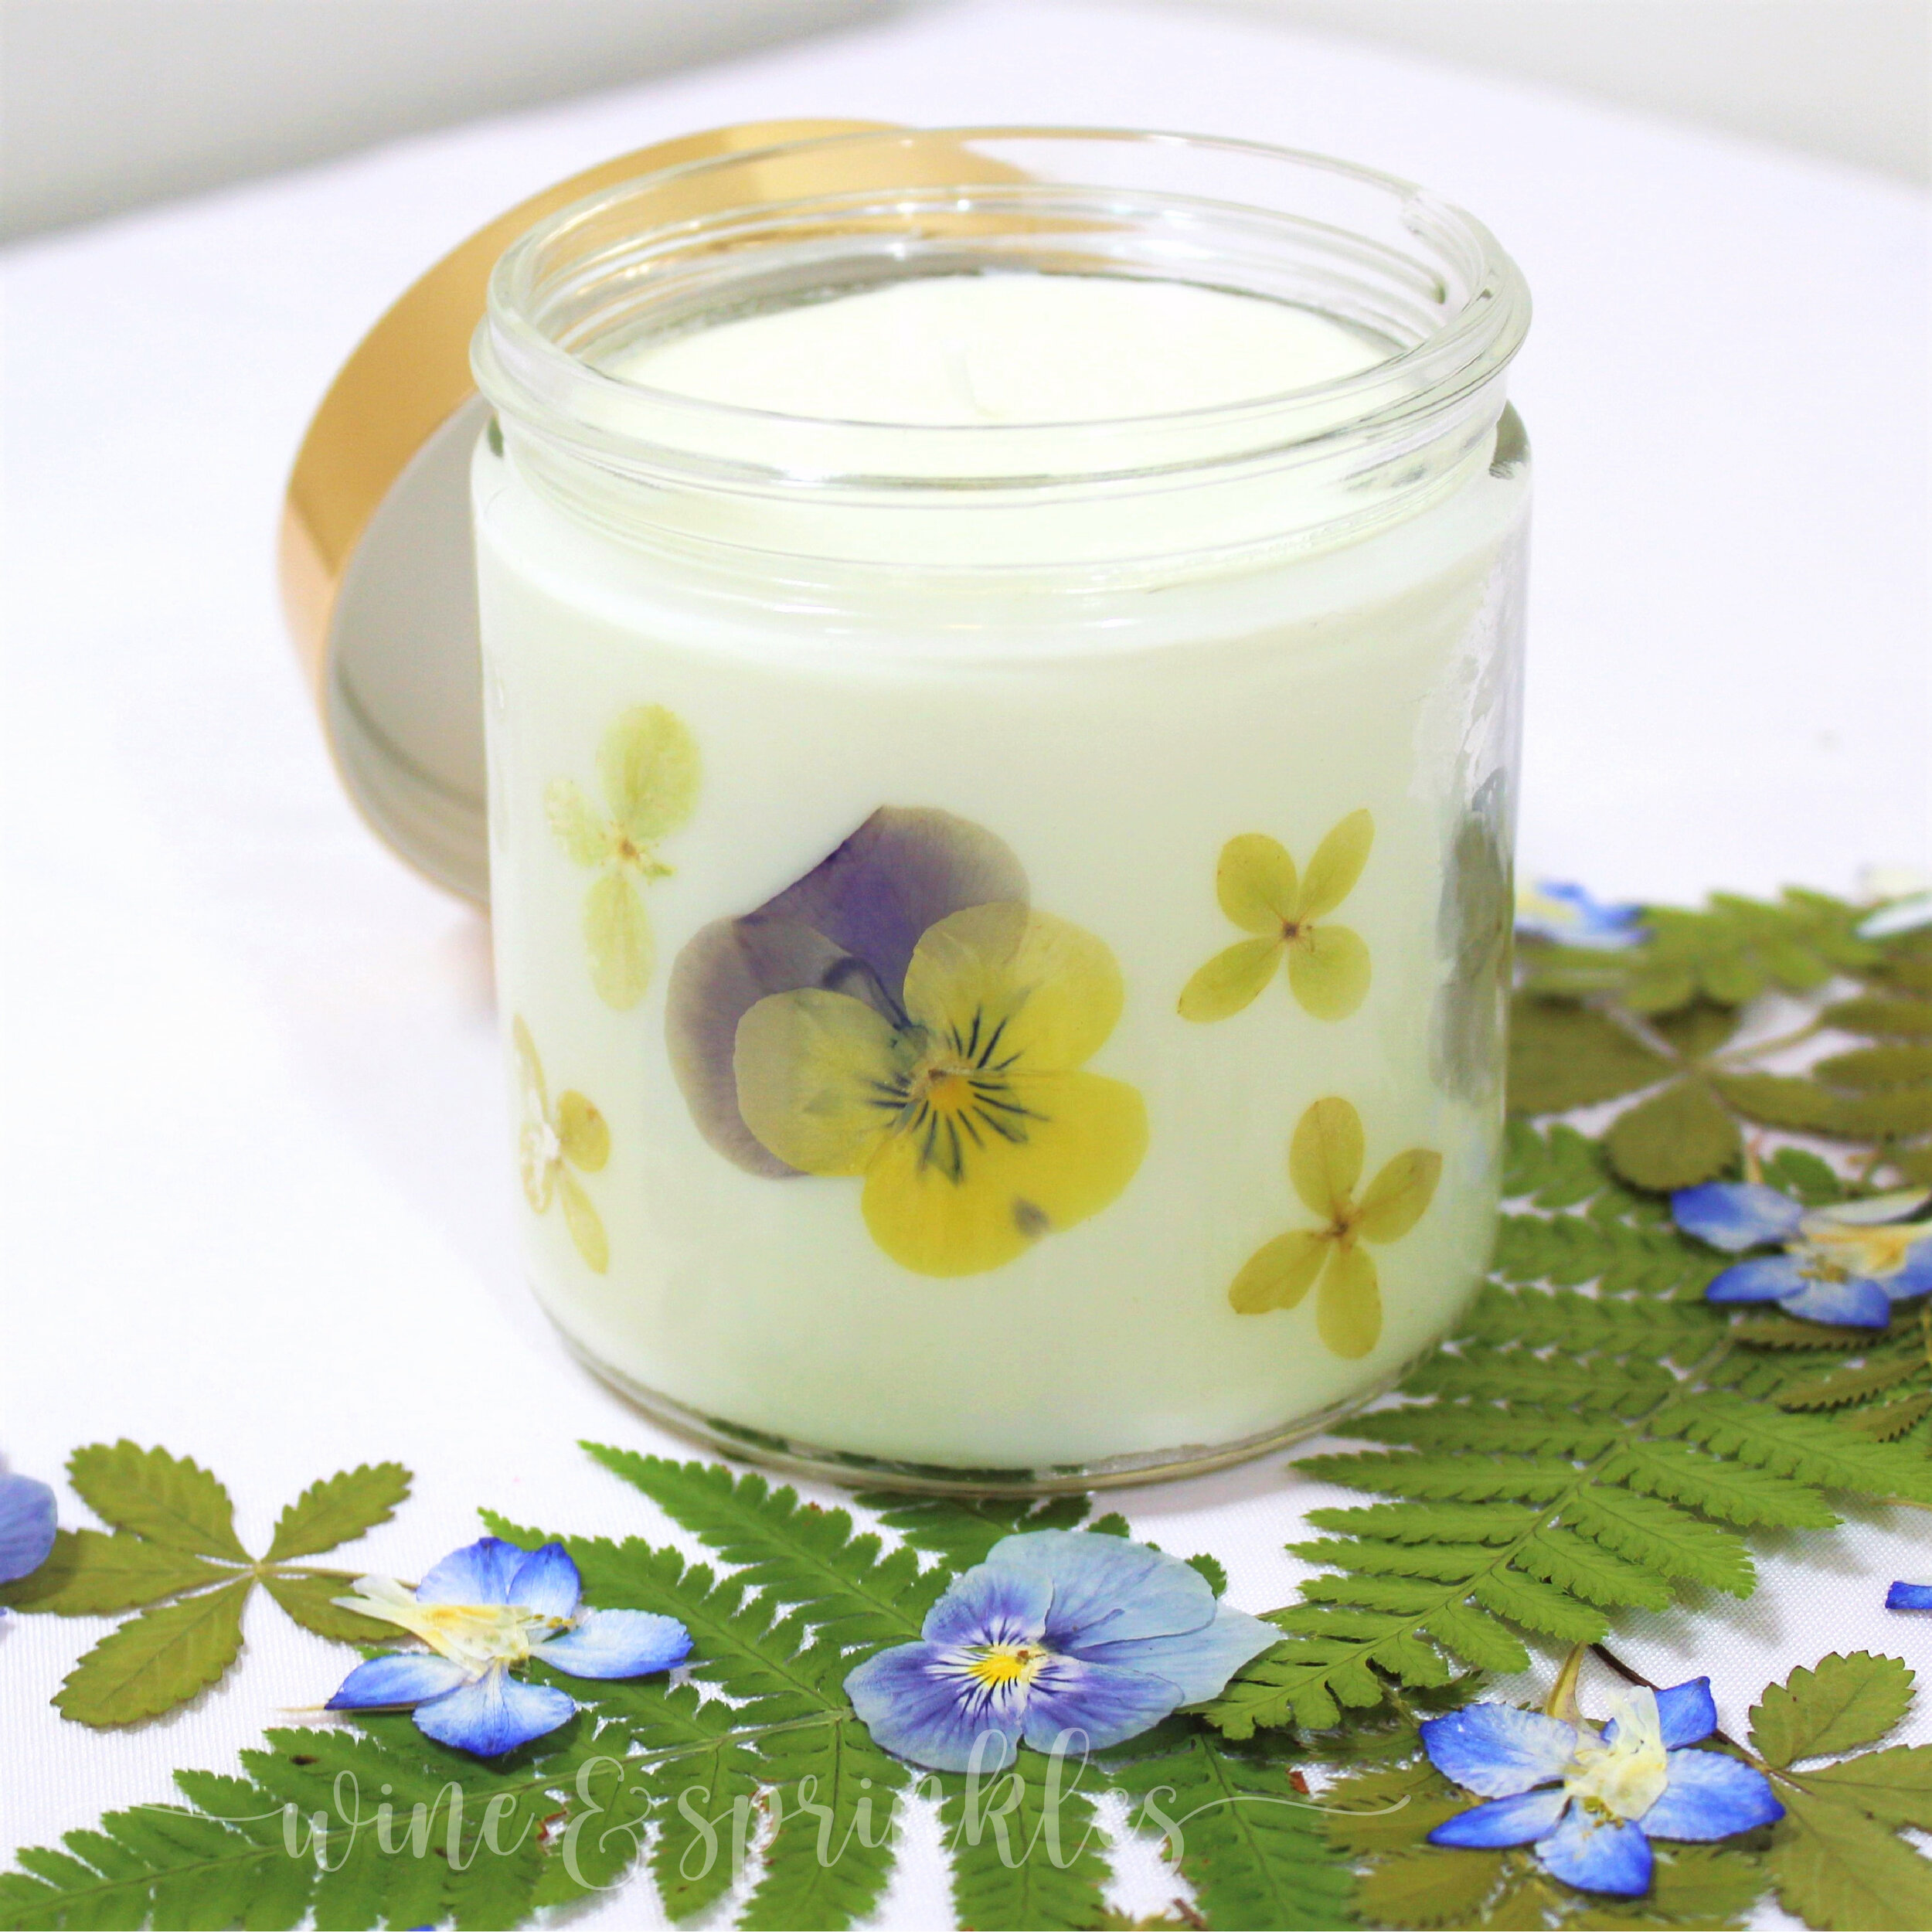 Create Beautiful Dried Flower Candles